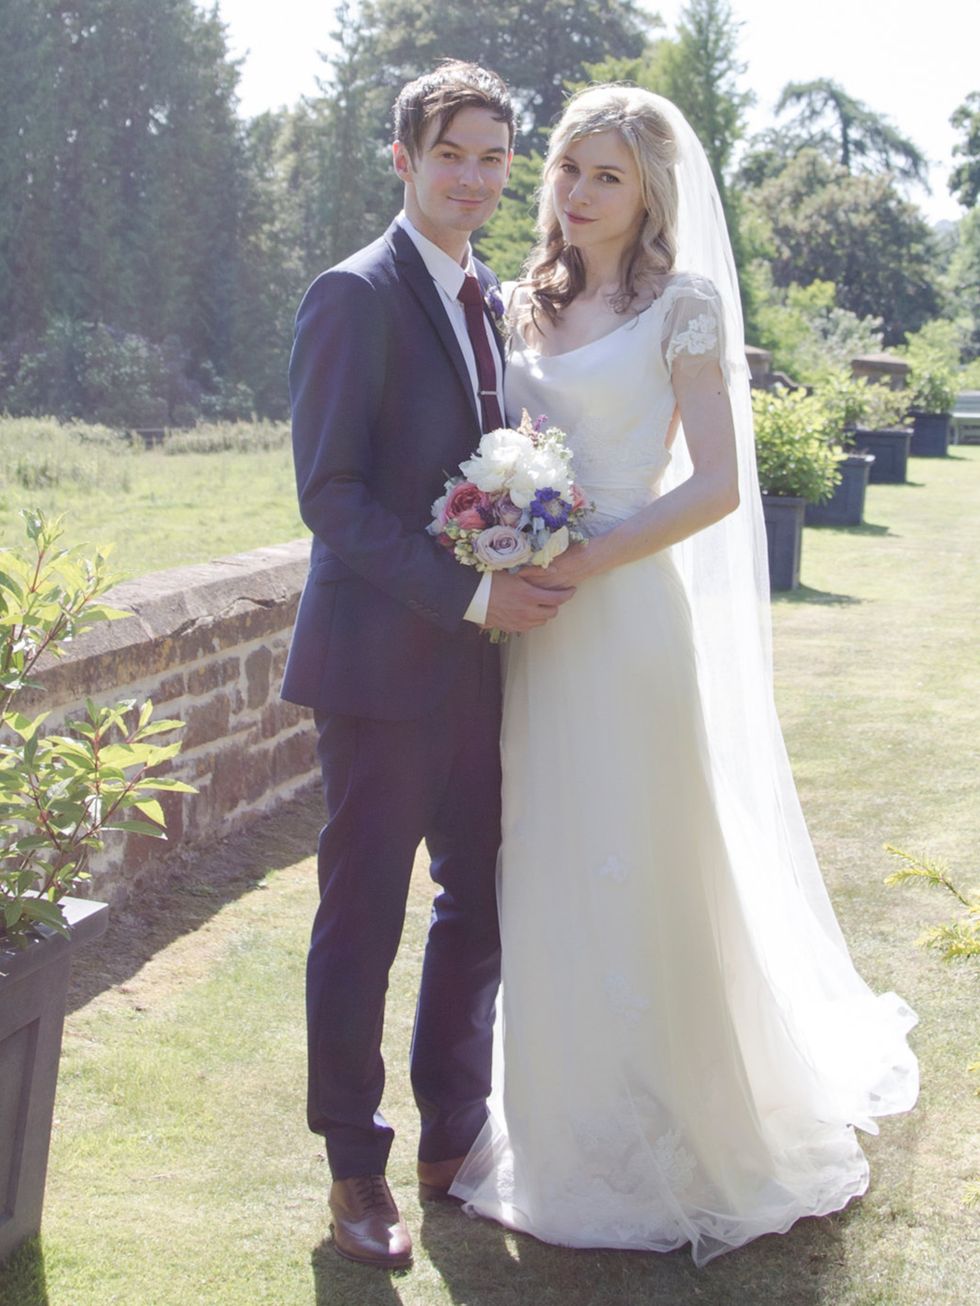 <p><strong>Patricia Campbell, ELLE Commercial Editor</strong><em>Lusan Mandongus for a Devon country house party wedding</em></p><p><strong>The Dress</strong>'Shopping for the dress was easy as I had a clear idea of what I wanted: figure-skimming silk wi